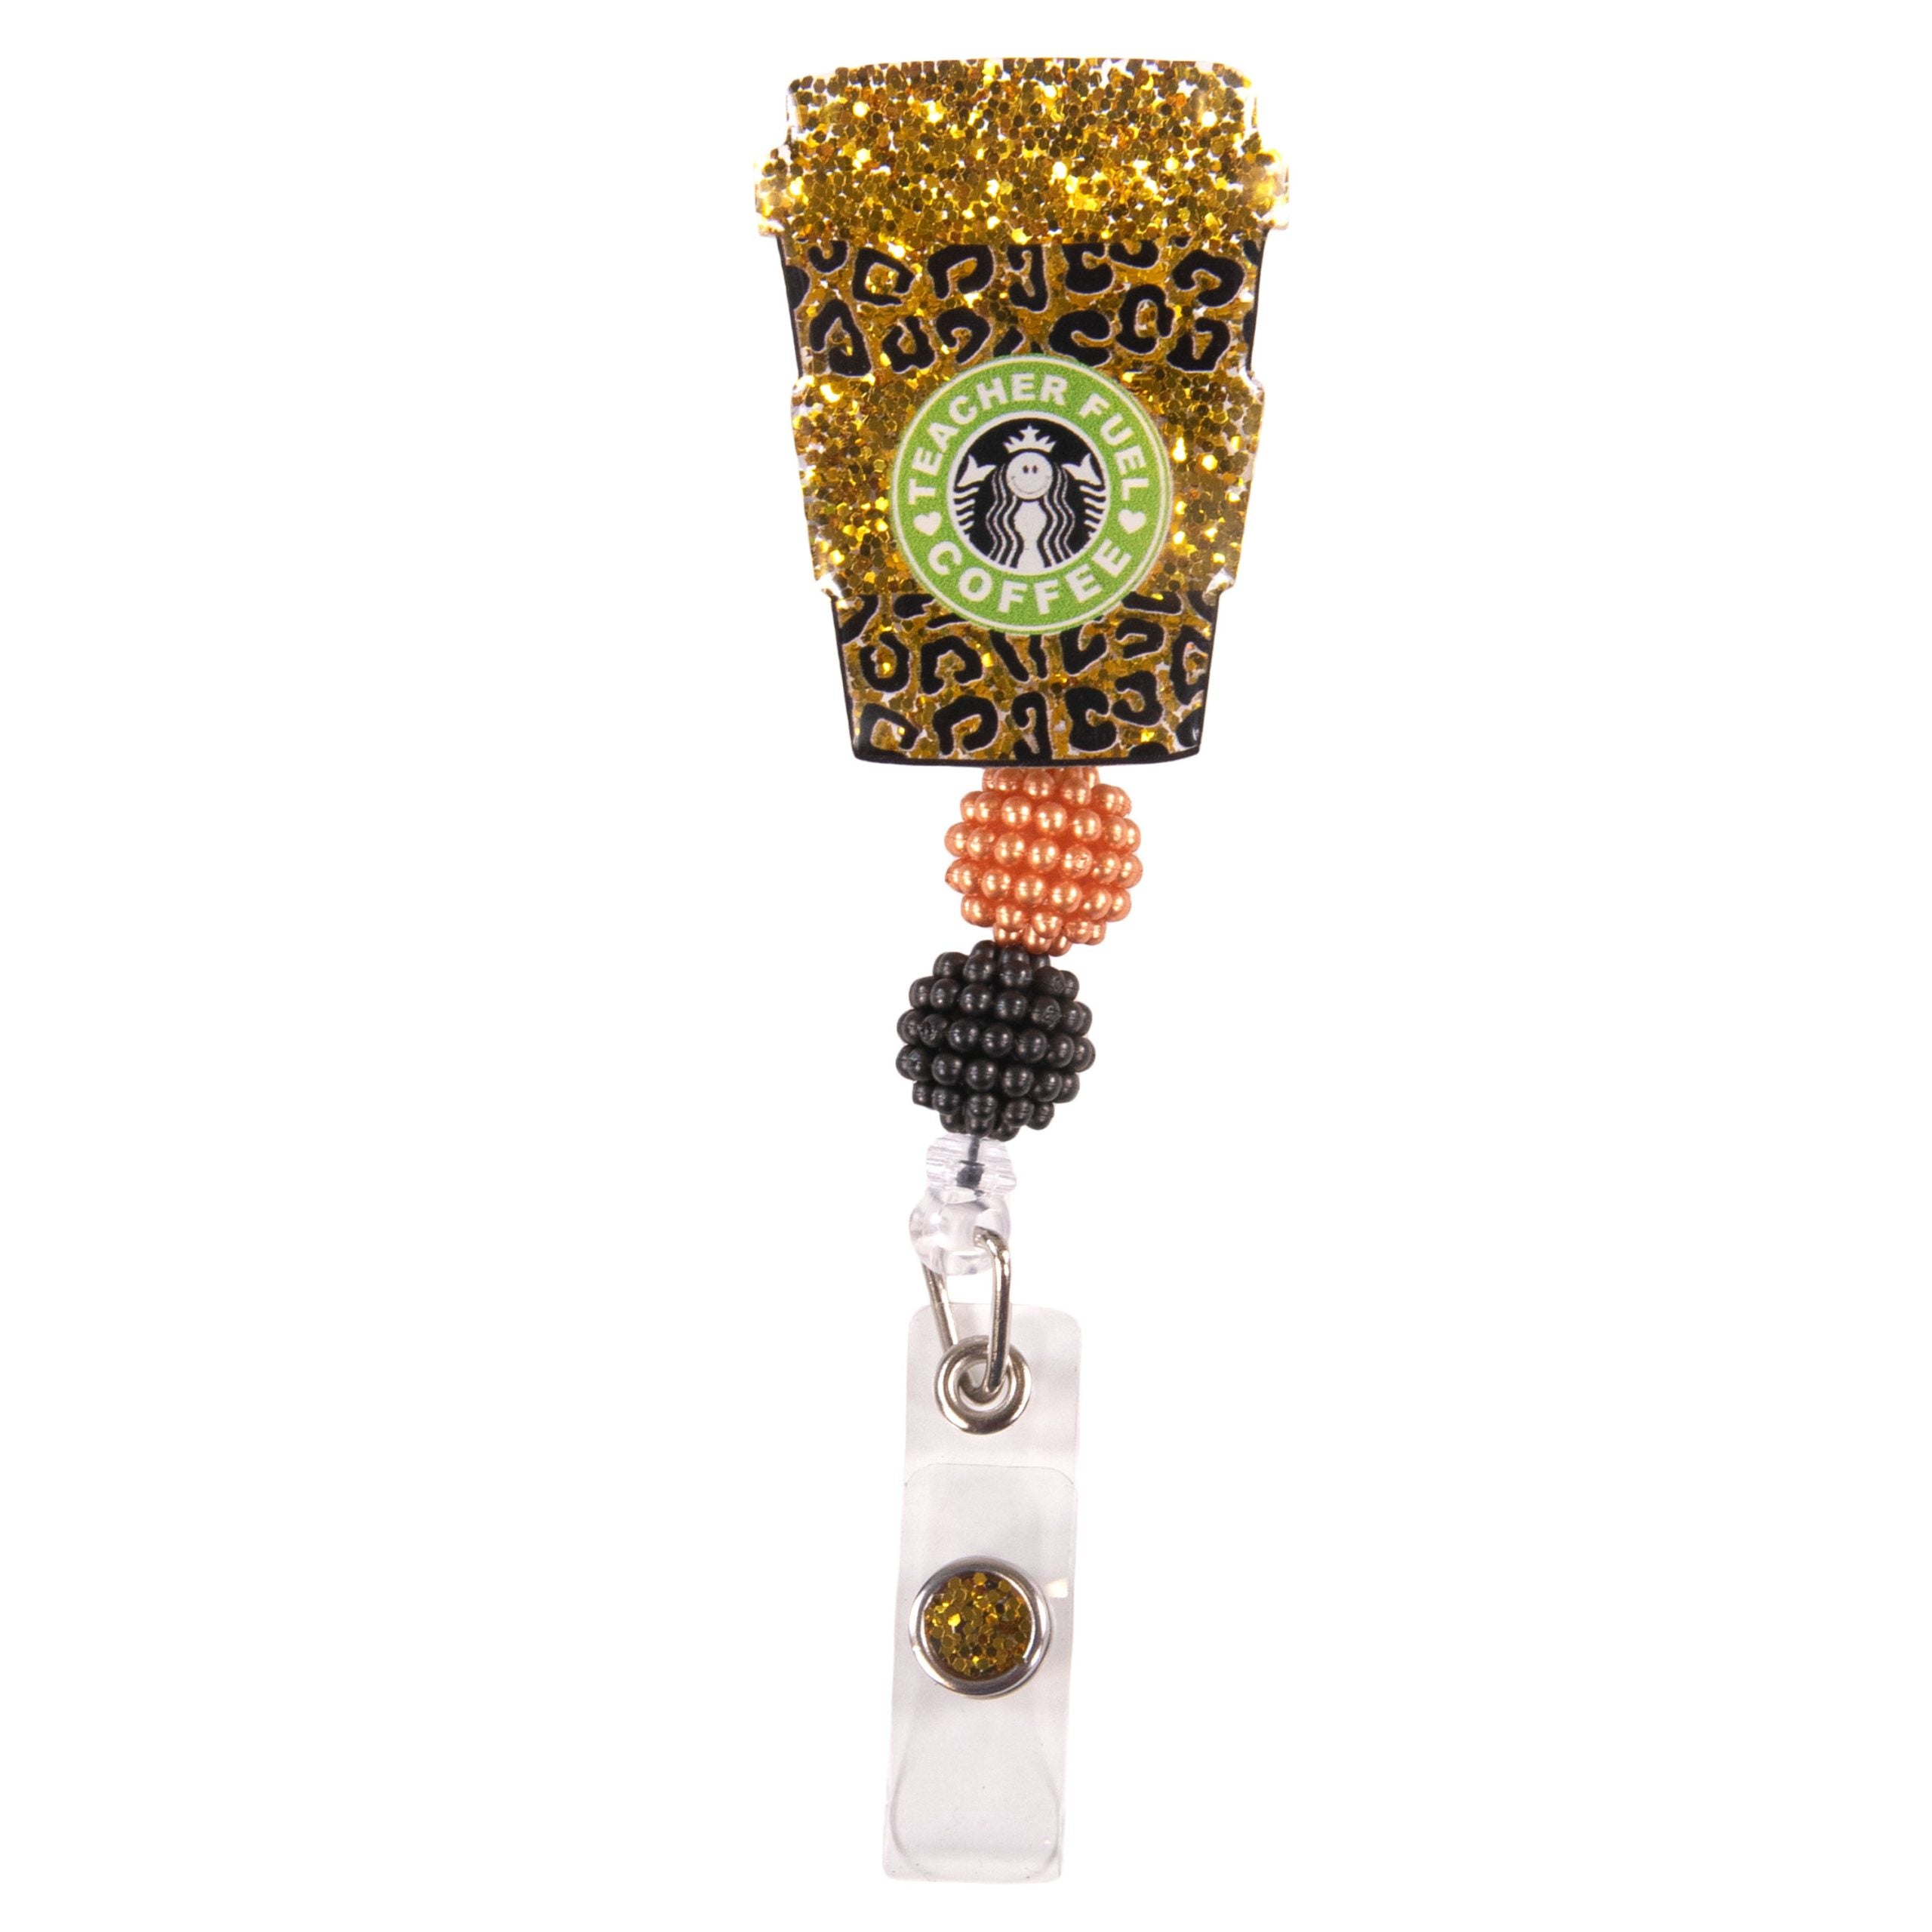 SIMPLY SOUTHERN BADGE REEL – Southern Clothing And More